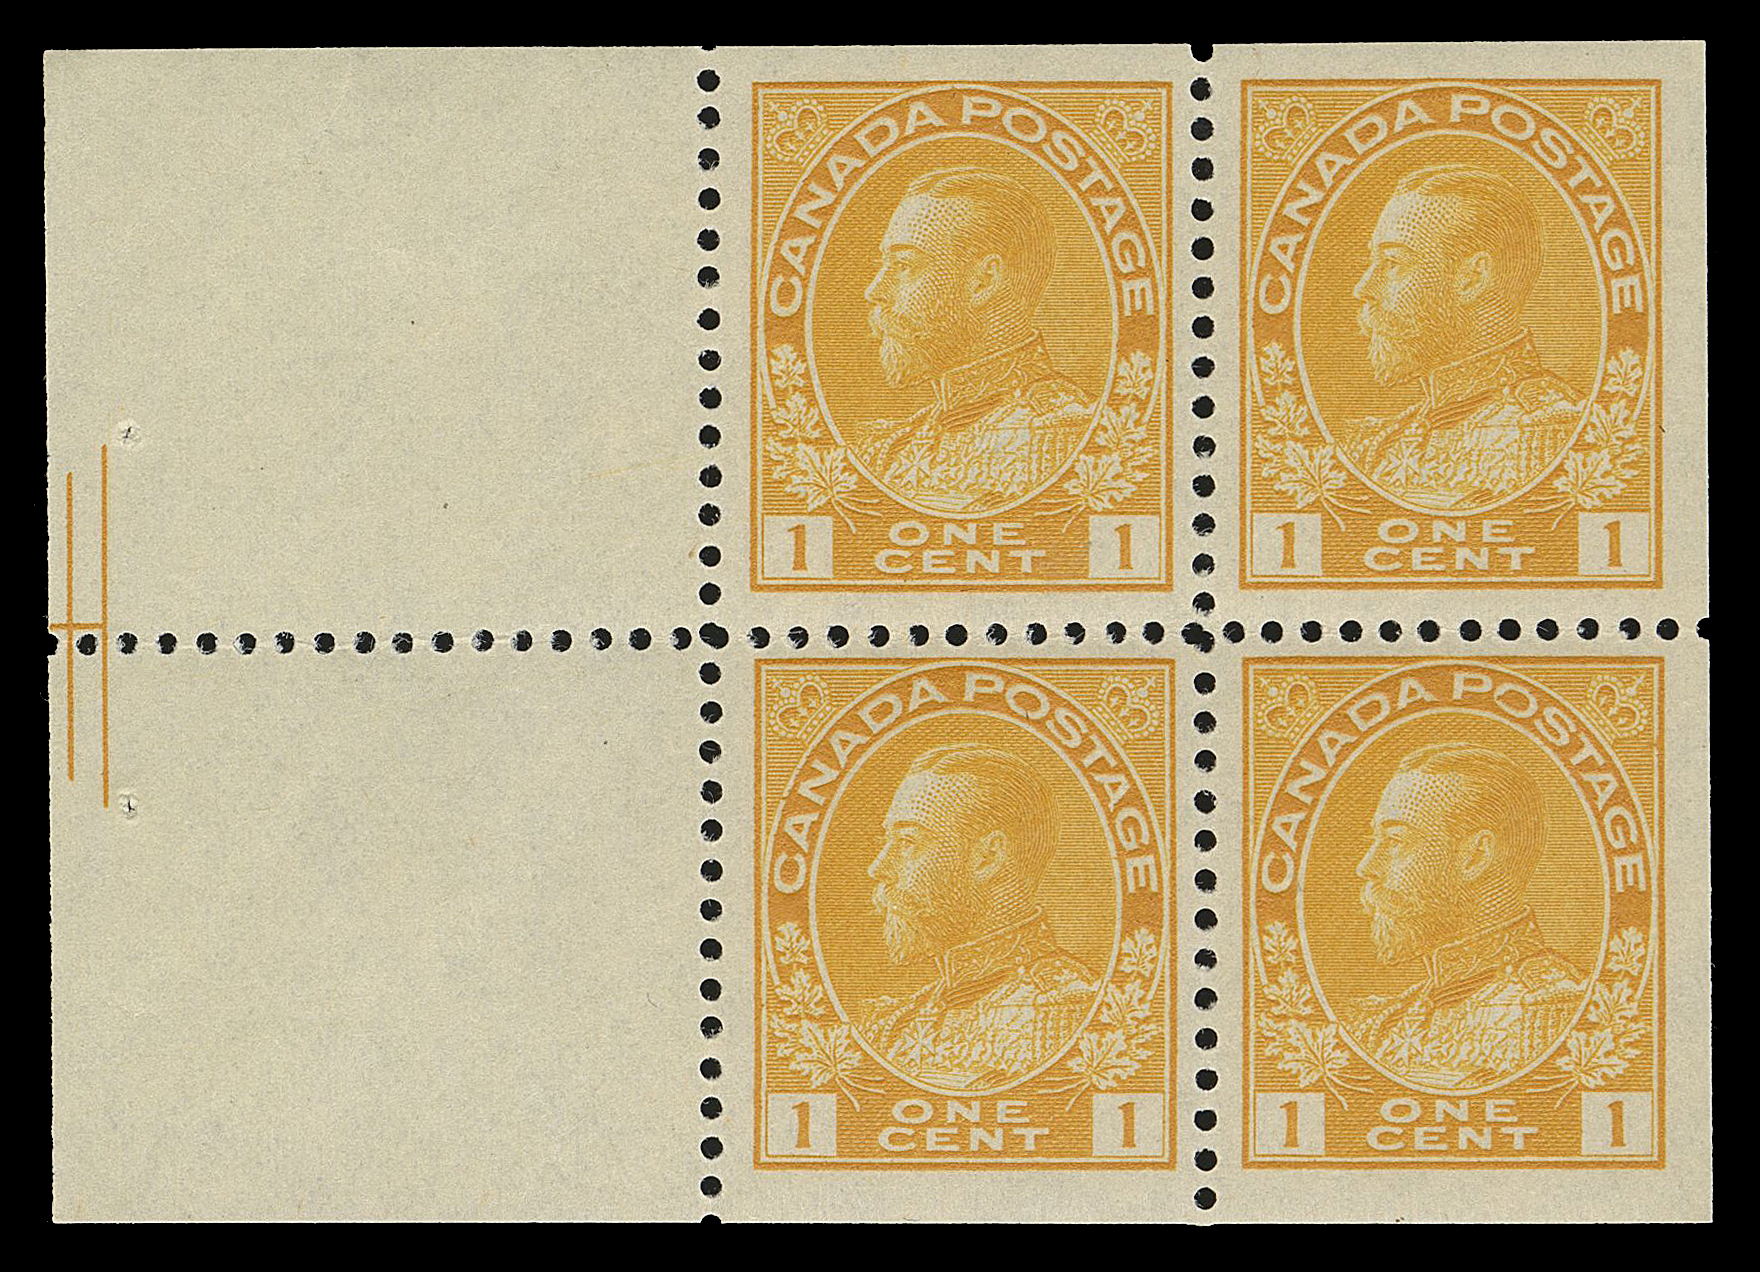 ADMIRAL STAMPS  105ai,A very attractive and nicely centered mint booklet pane of four, shows a sharp impression of the two-line Pyramid Guideline in tab margin, lightly hinged on top right stamp and natural gum inclusion in margin. A beautiful and very scarce pane, VF LH

Provenance: The "Lindemann" Collection (private treaty, circa. 1997)

Census: Based on the comprehensive listing compiled by Leopold Beaudet and John Jamieson, published in the Admiral